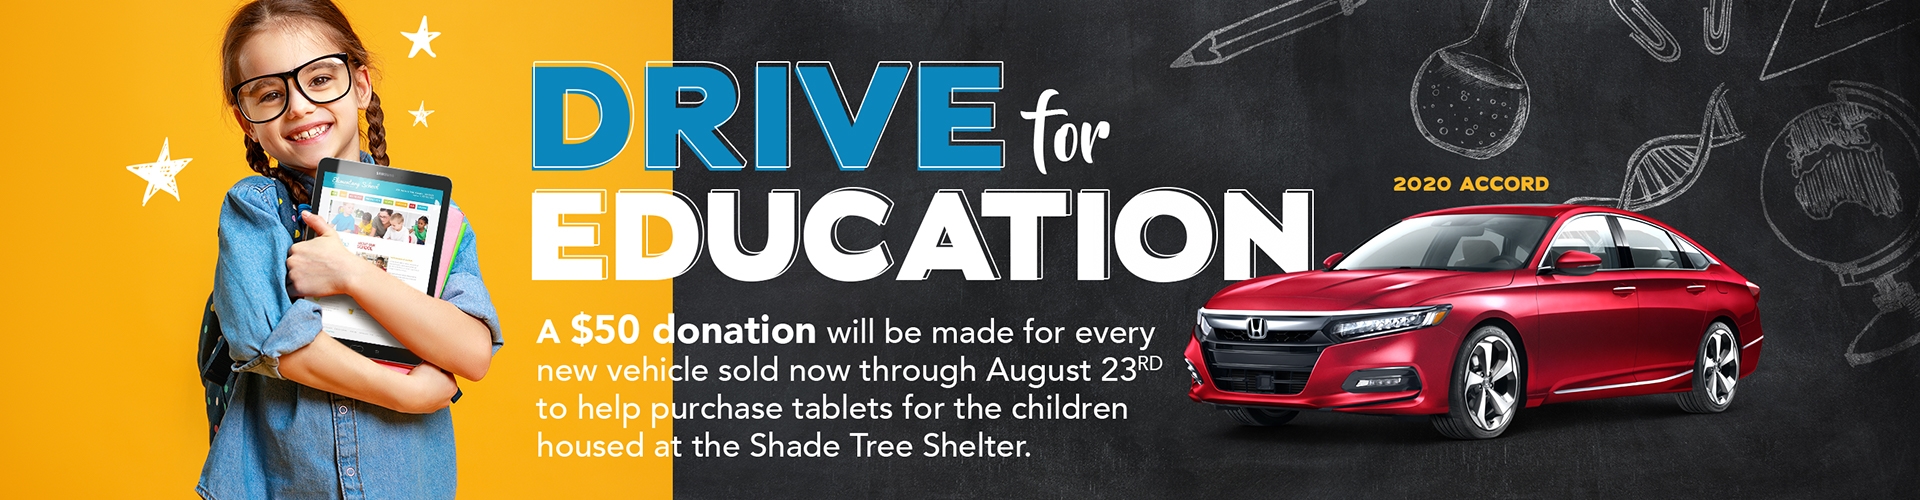 Drive For Education